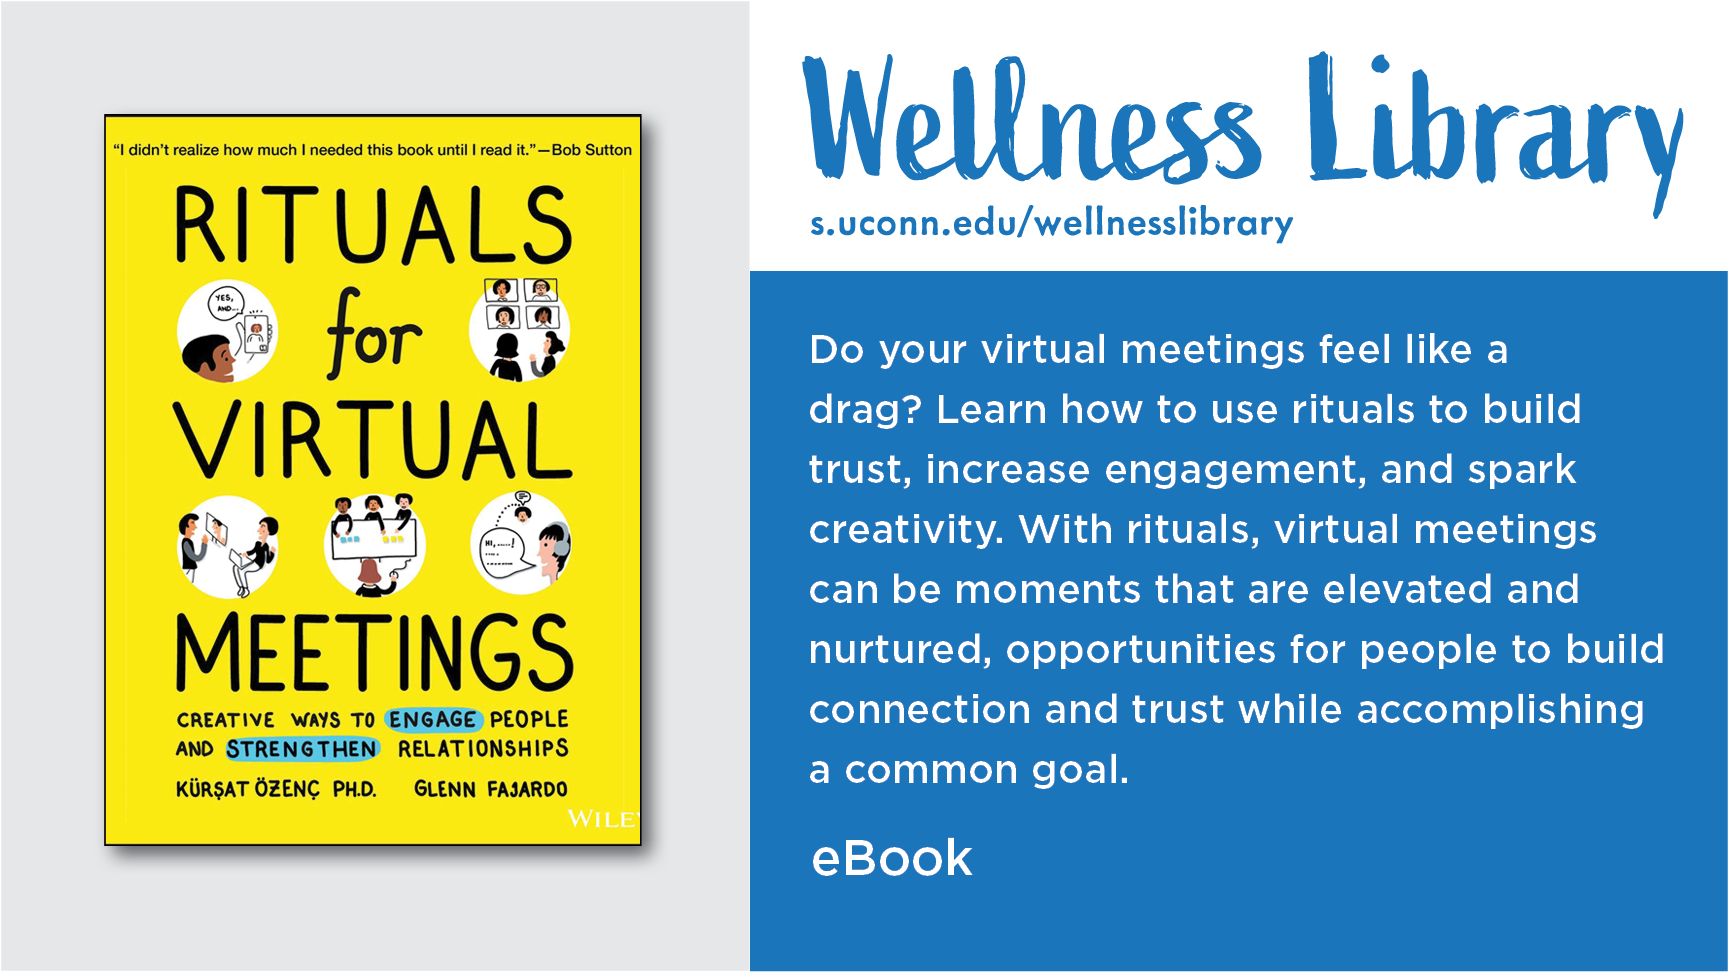 Wellness Library Title - Rituals for Virtual Meetings